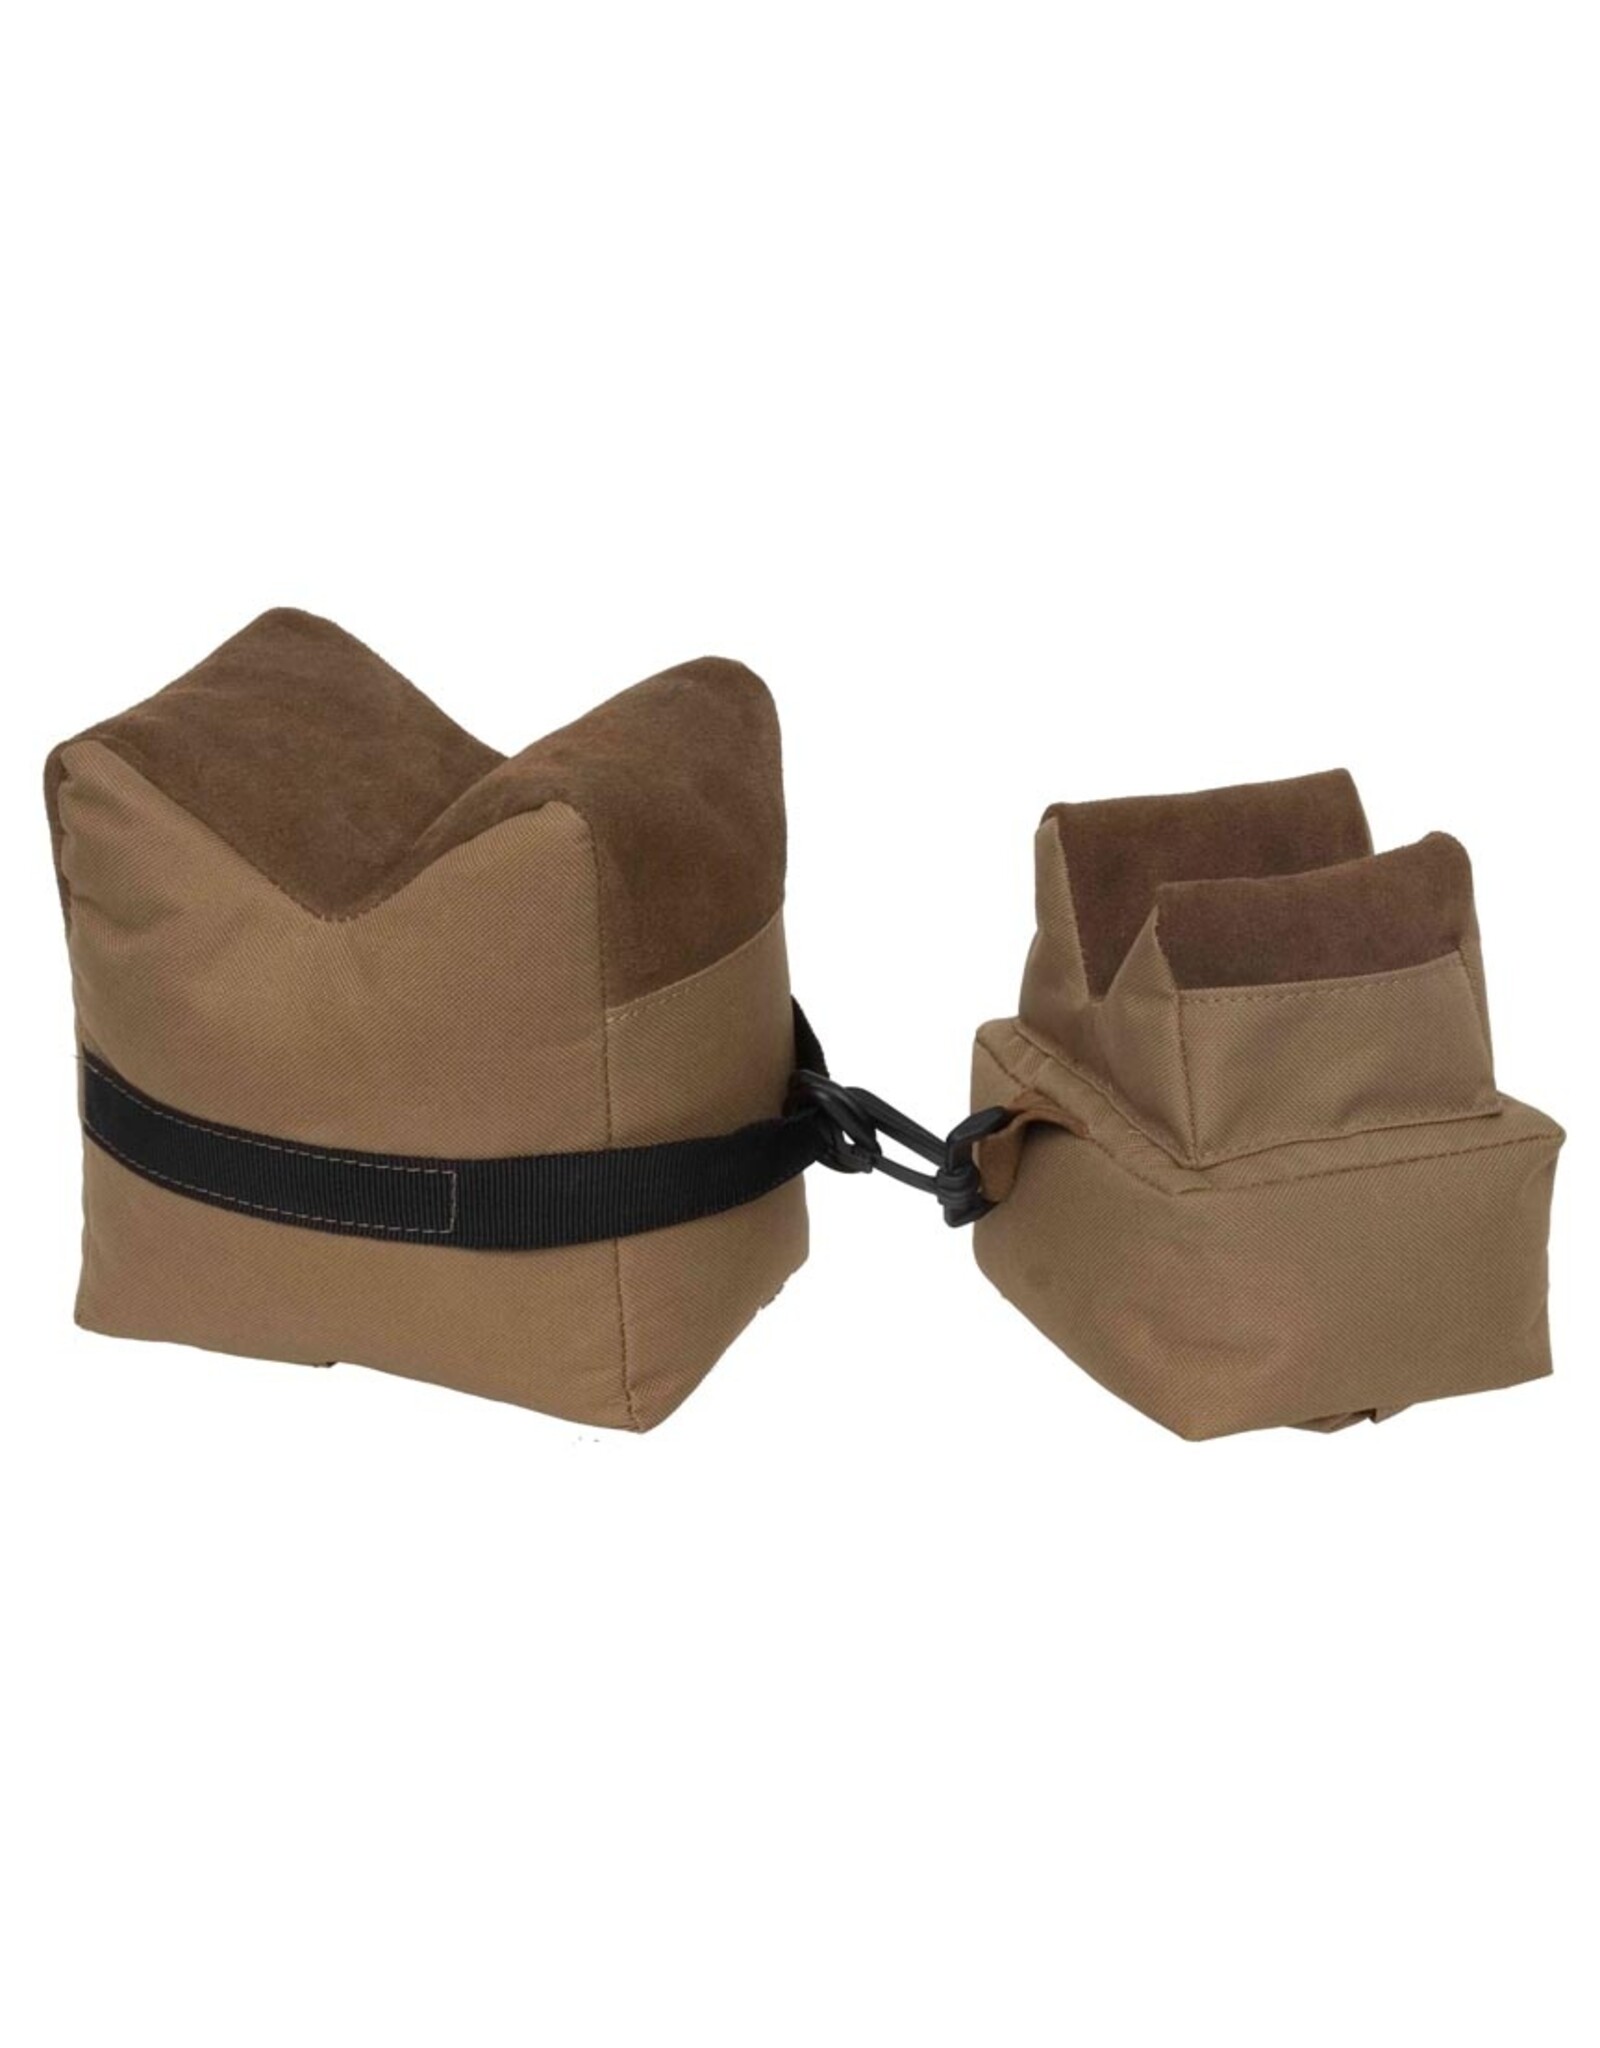 Outdoor Connections Outdoor Connection 2-Piece Bench Bags